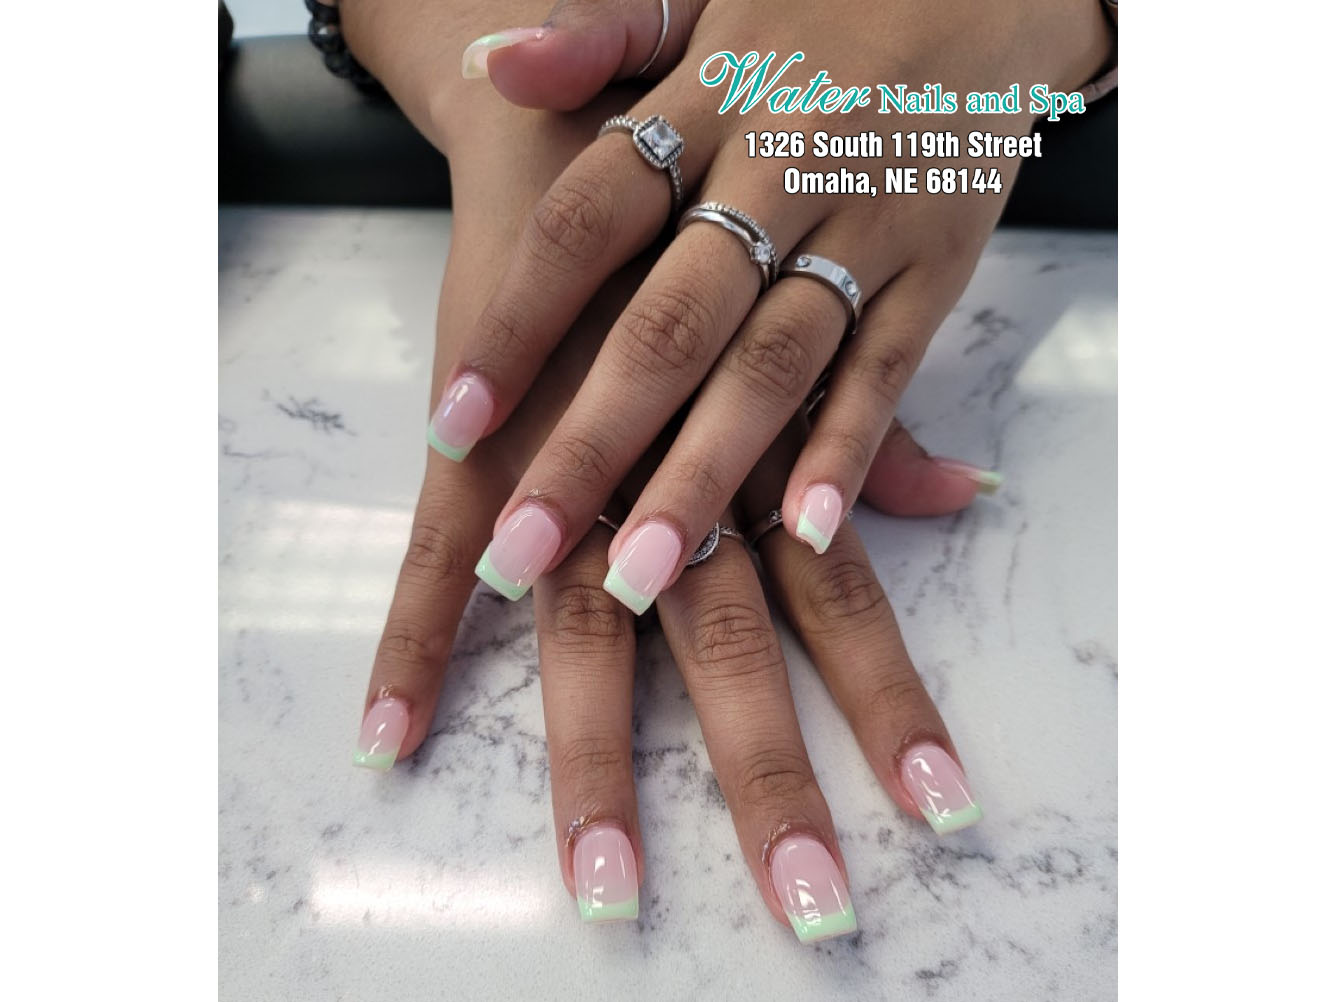 Make an appointment today wwith us and transform your manicure ...